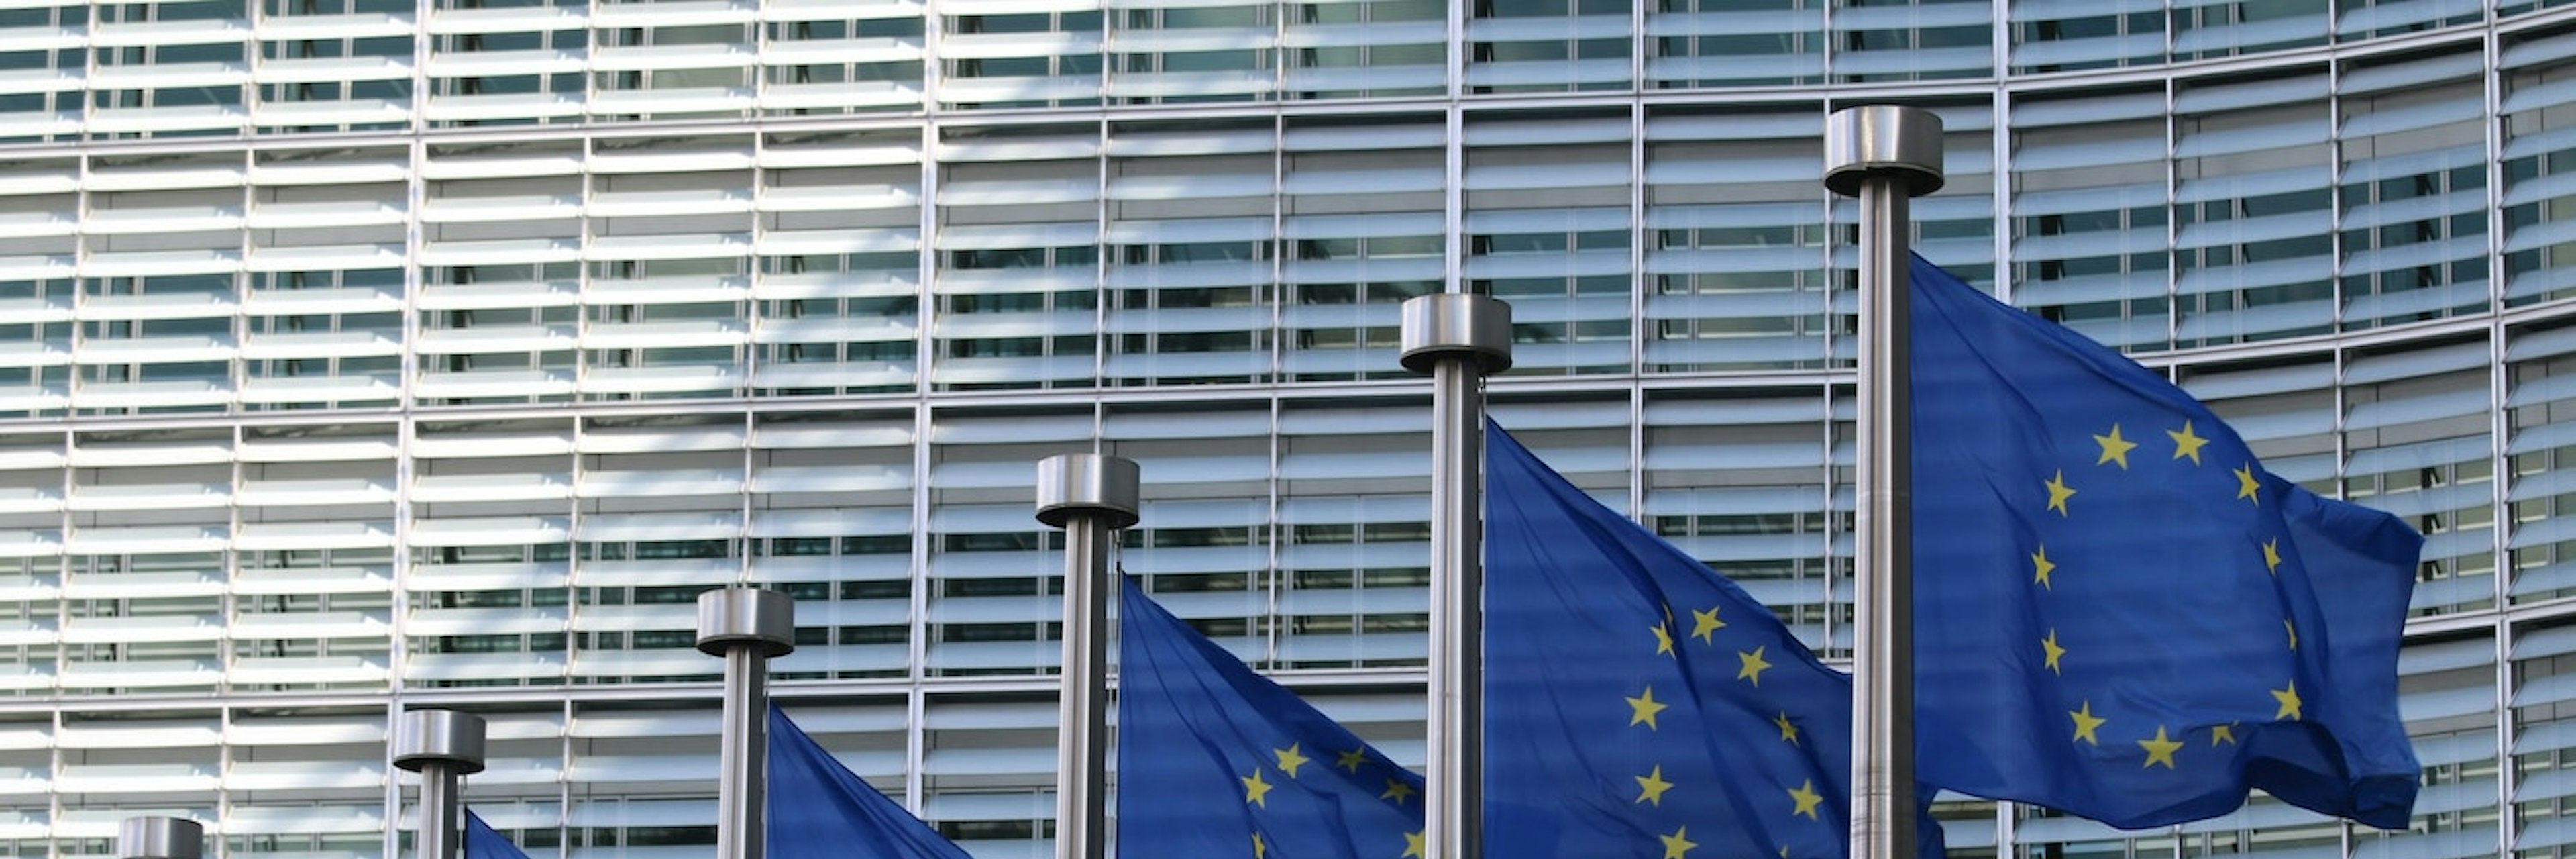 Image of EU flags outside the European Commission building in Brussels